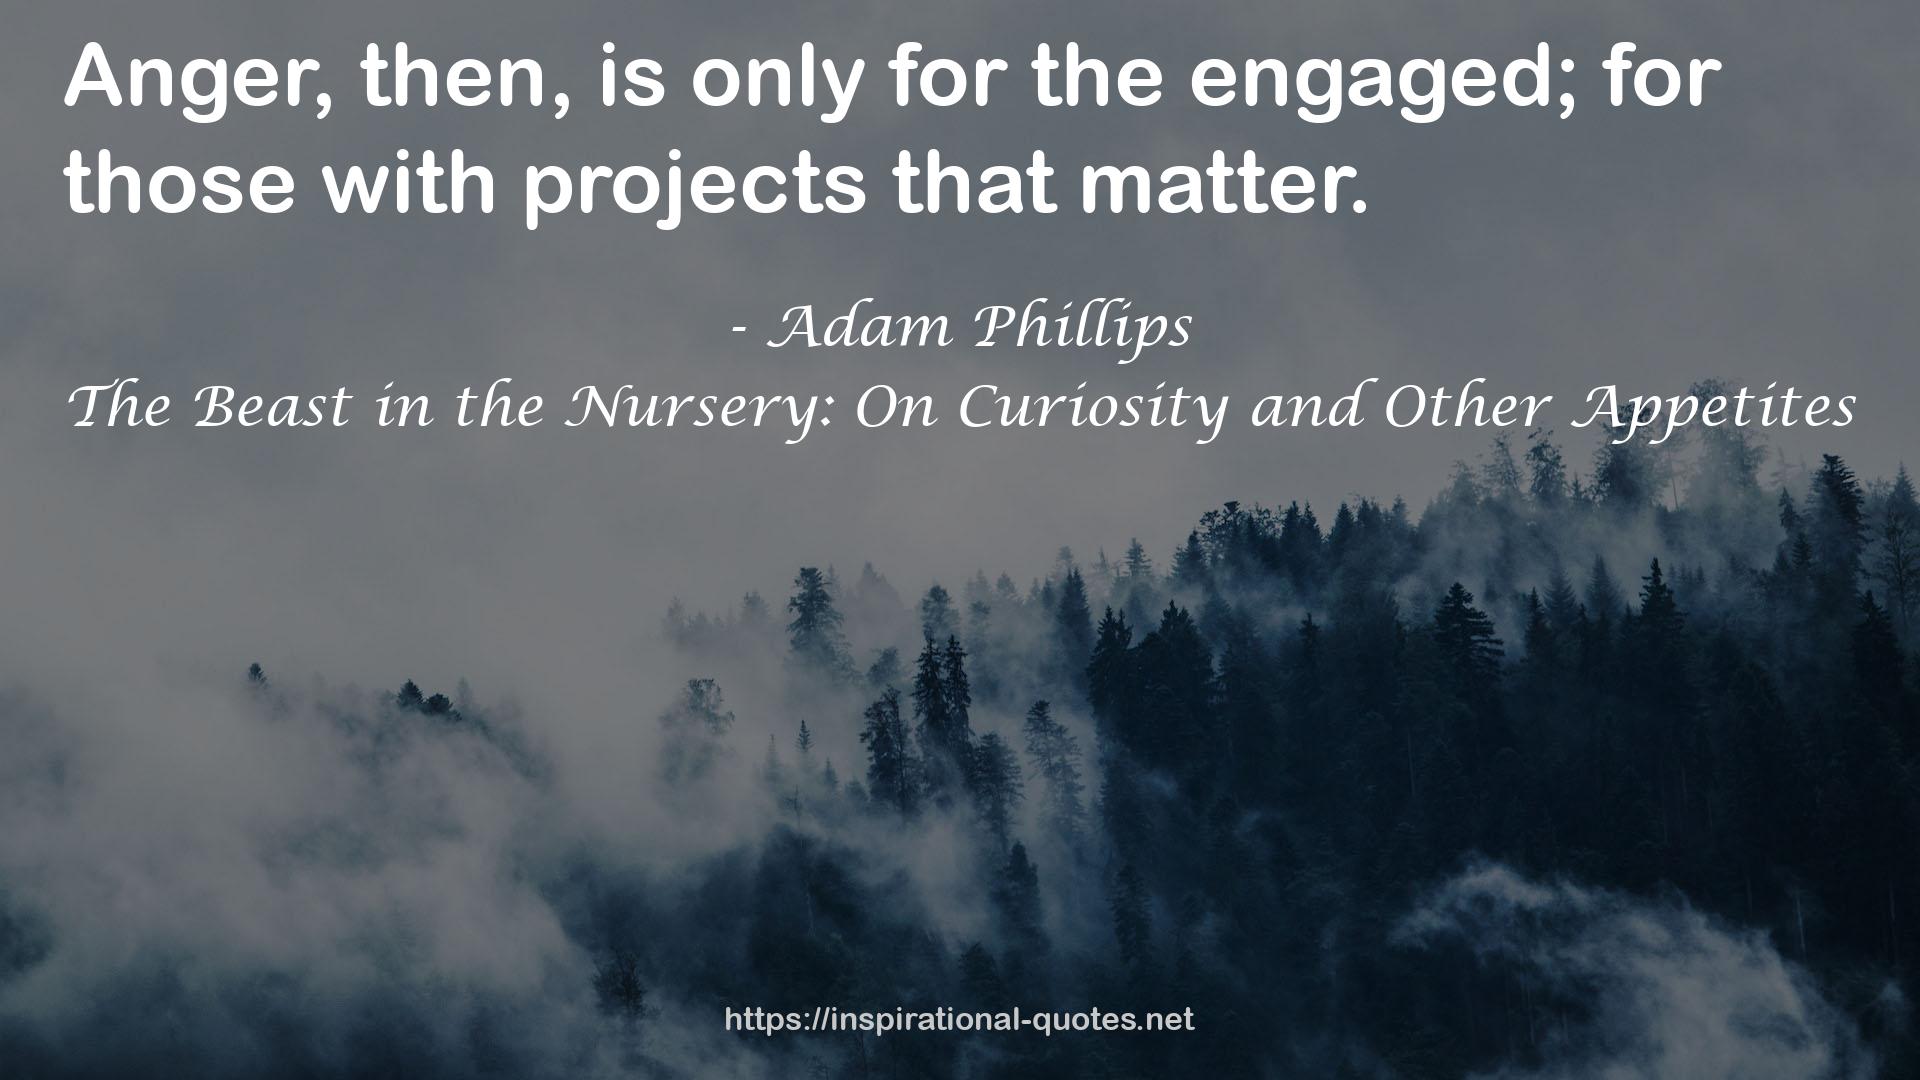 The Beast in the Nursery: On Curiosity and Other Appetites QUOTES